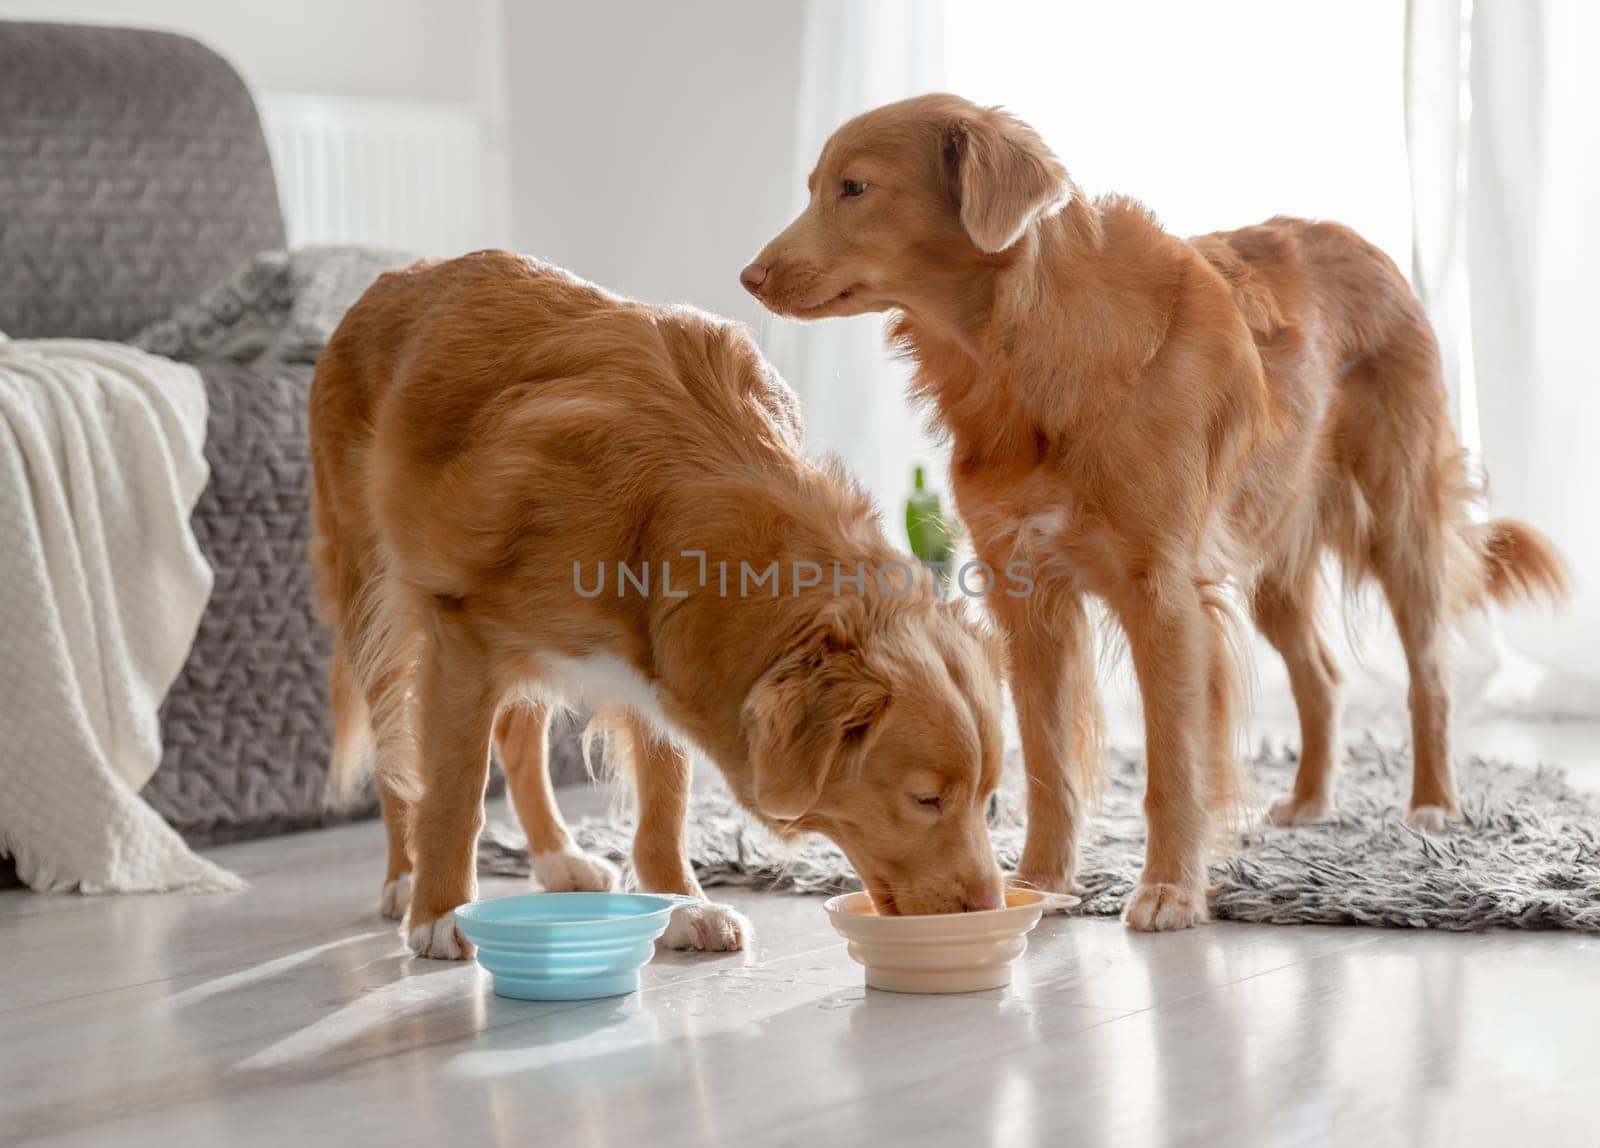 Two Nova Scotia Retriever Dogs Are Drinking From Bowls At Home